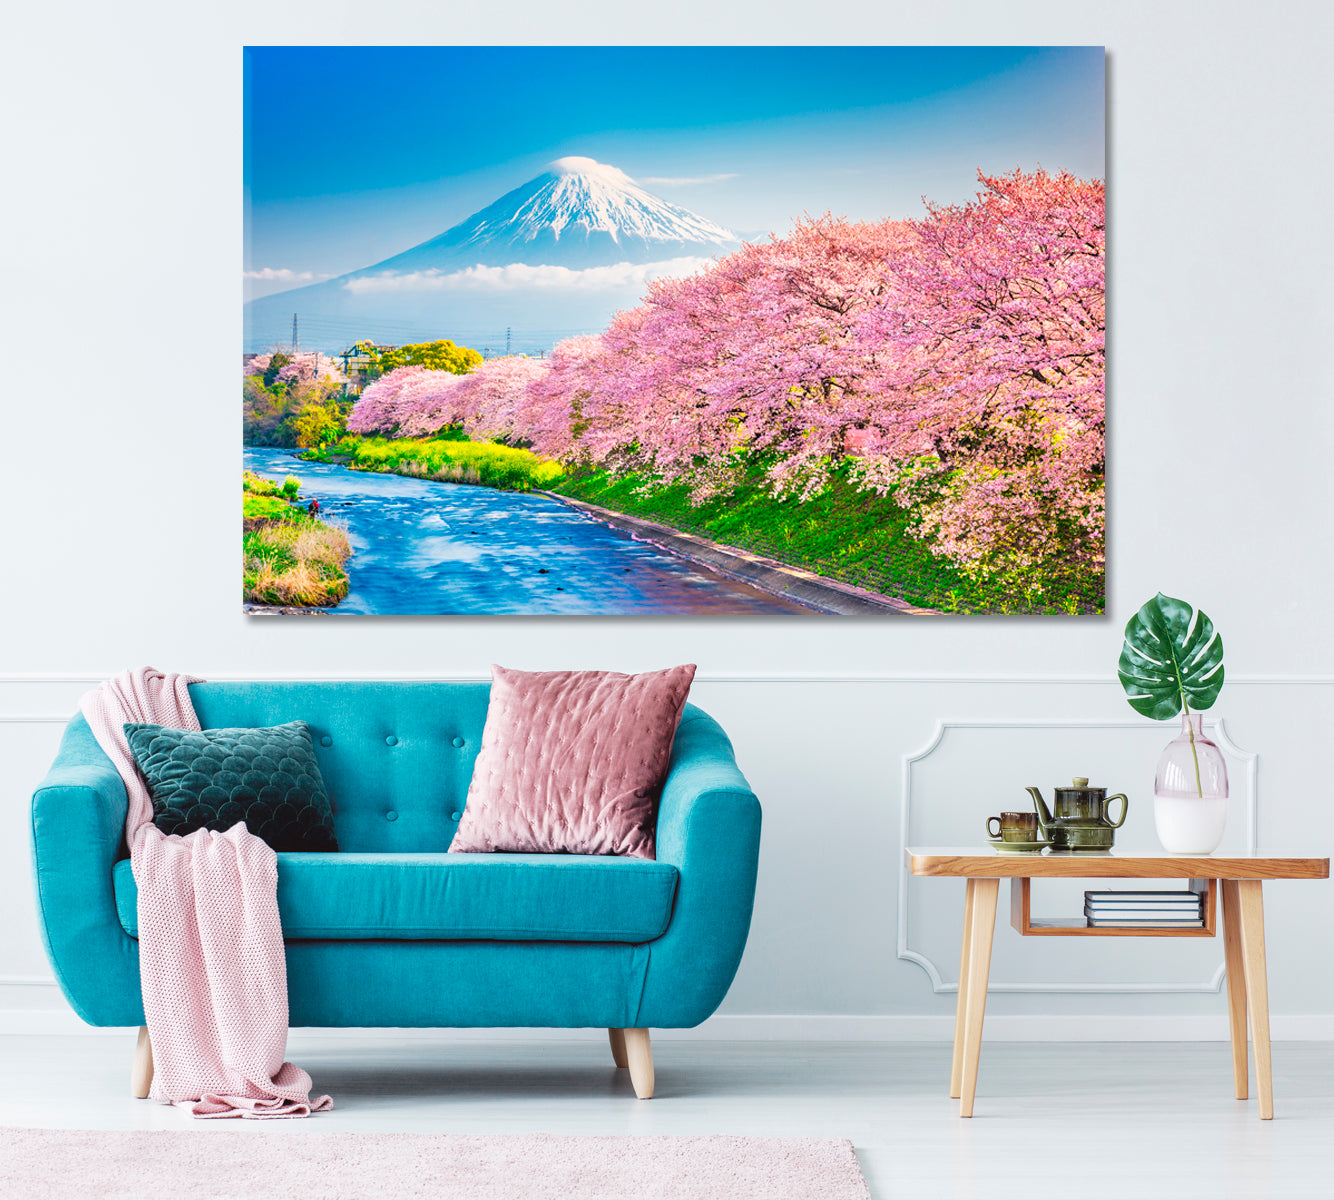 Mount Fuji with Cherry Blossoms Japan Canvas Print ArtLexy 1 Panel 24"x16" inches 